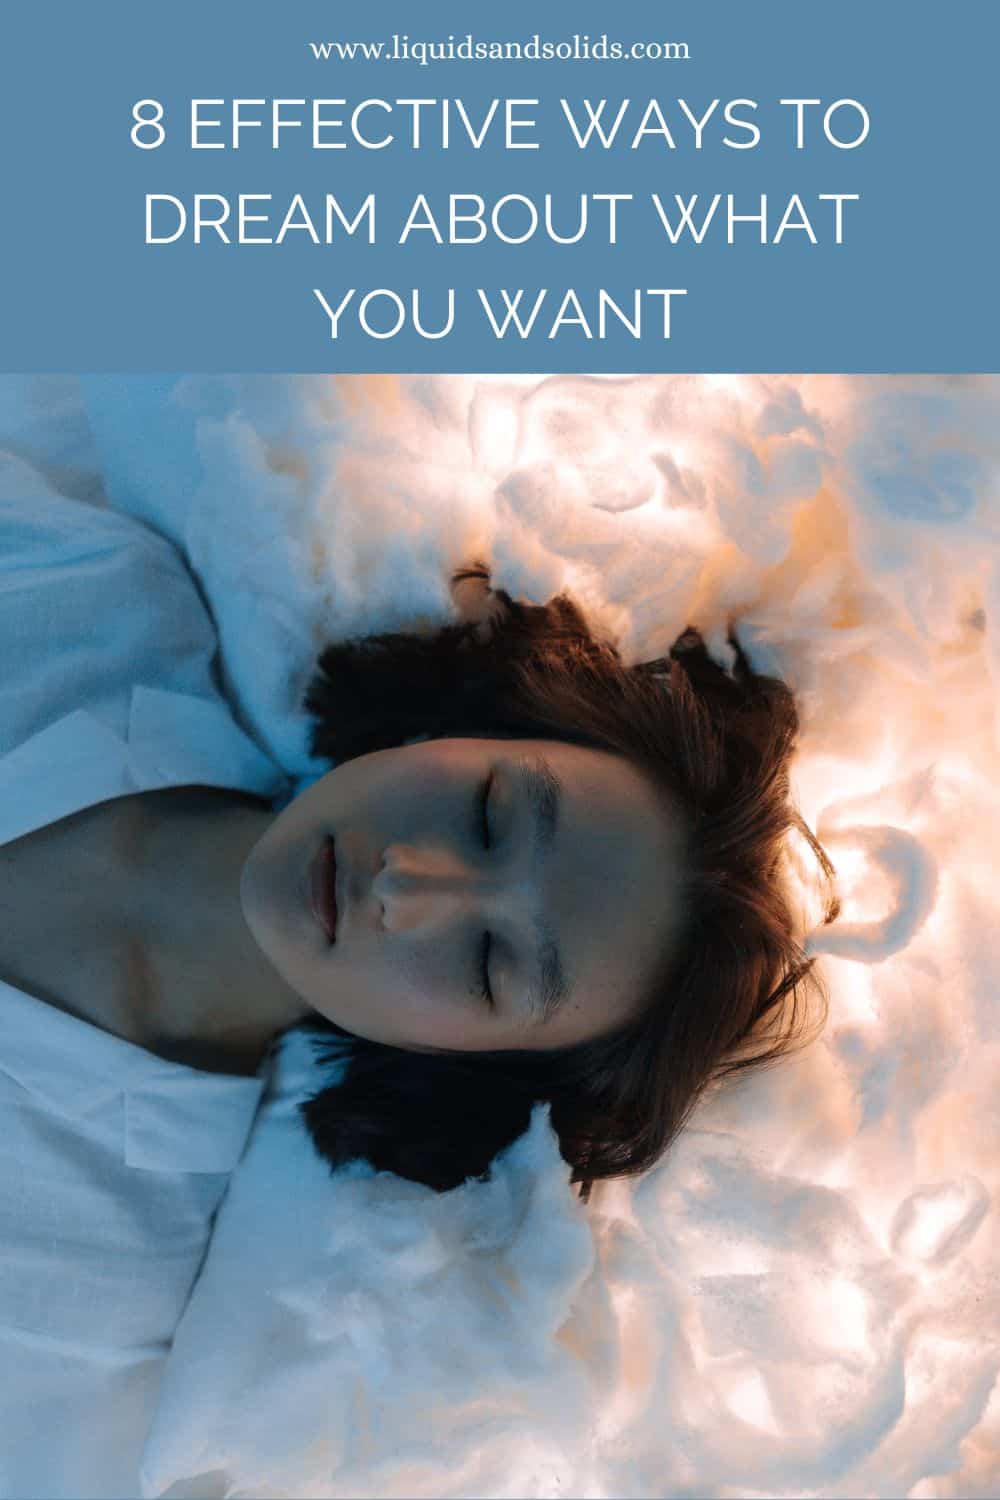 8 Effective Ways To Dream About What You Want